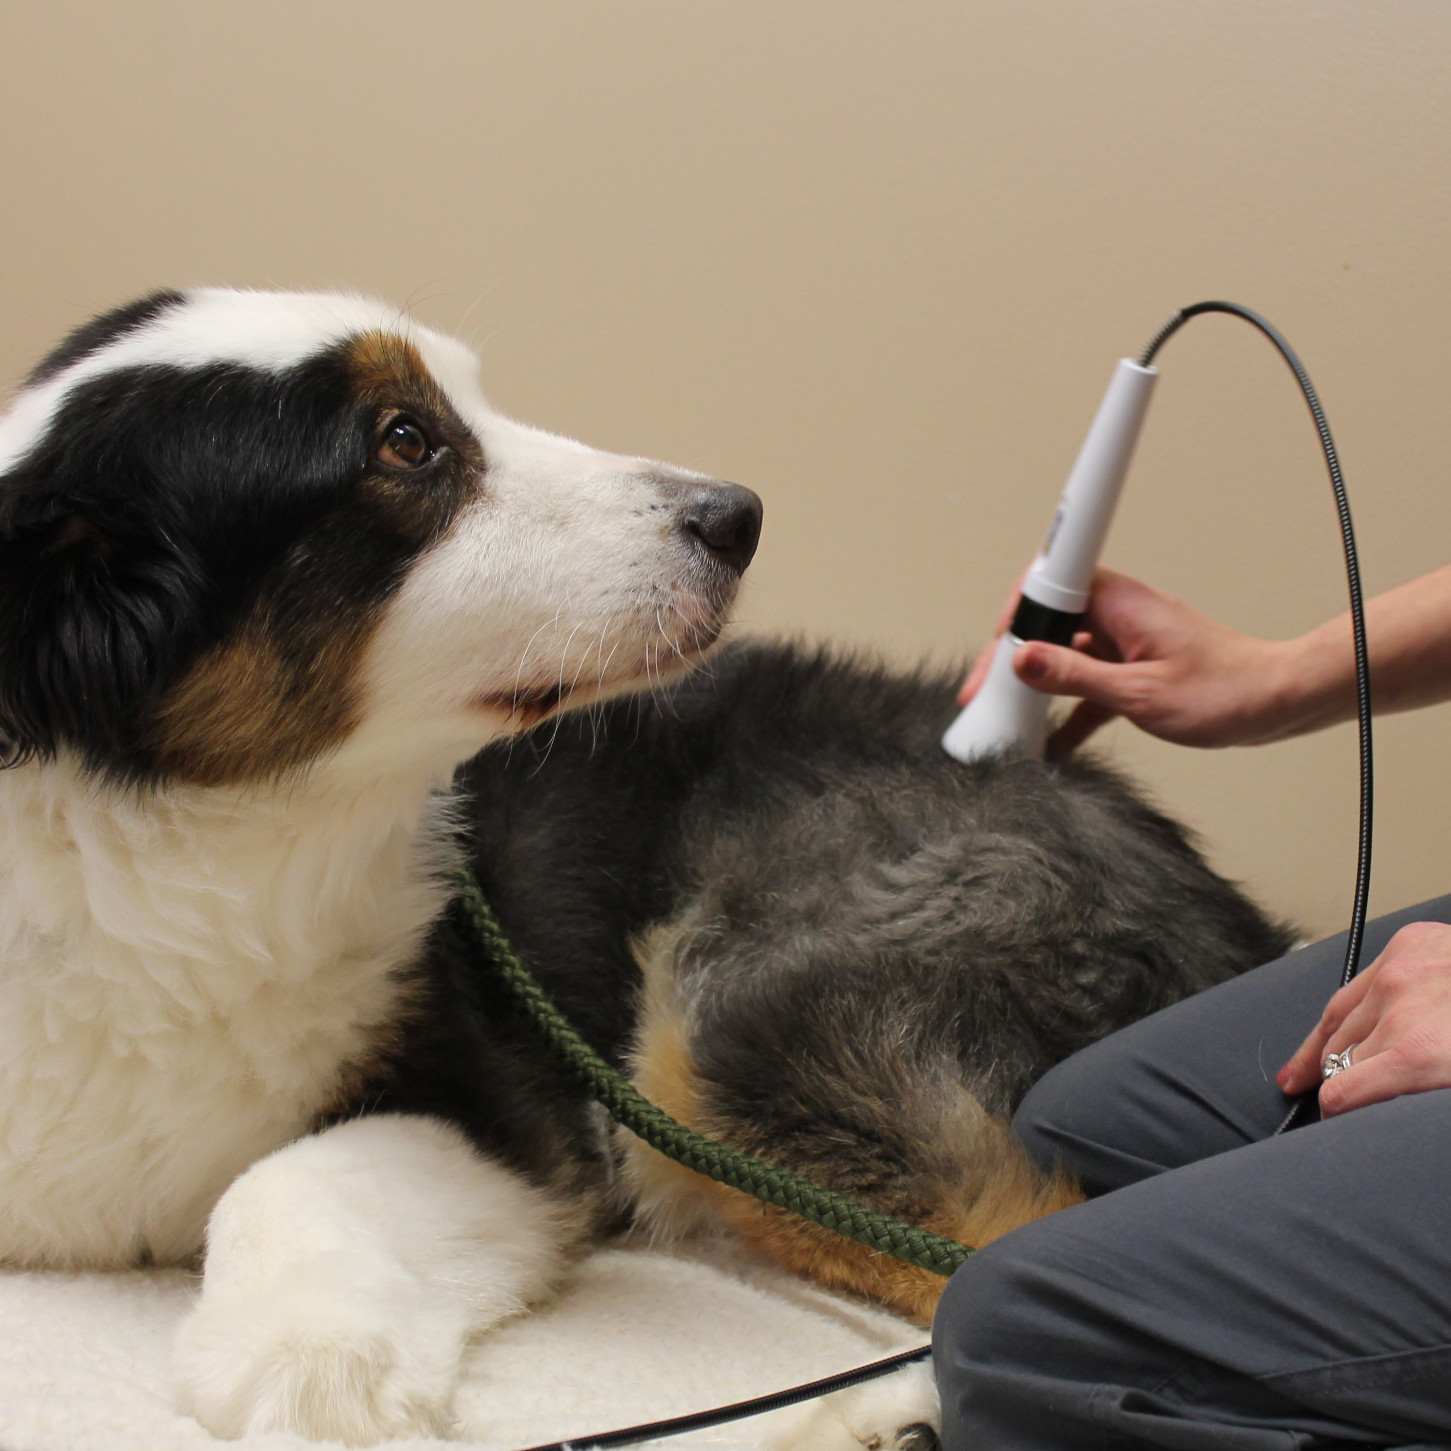 Veterinary staff member using laser therapy equipment on dog